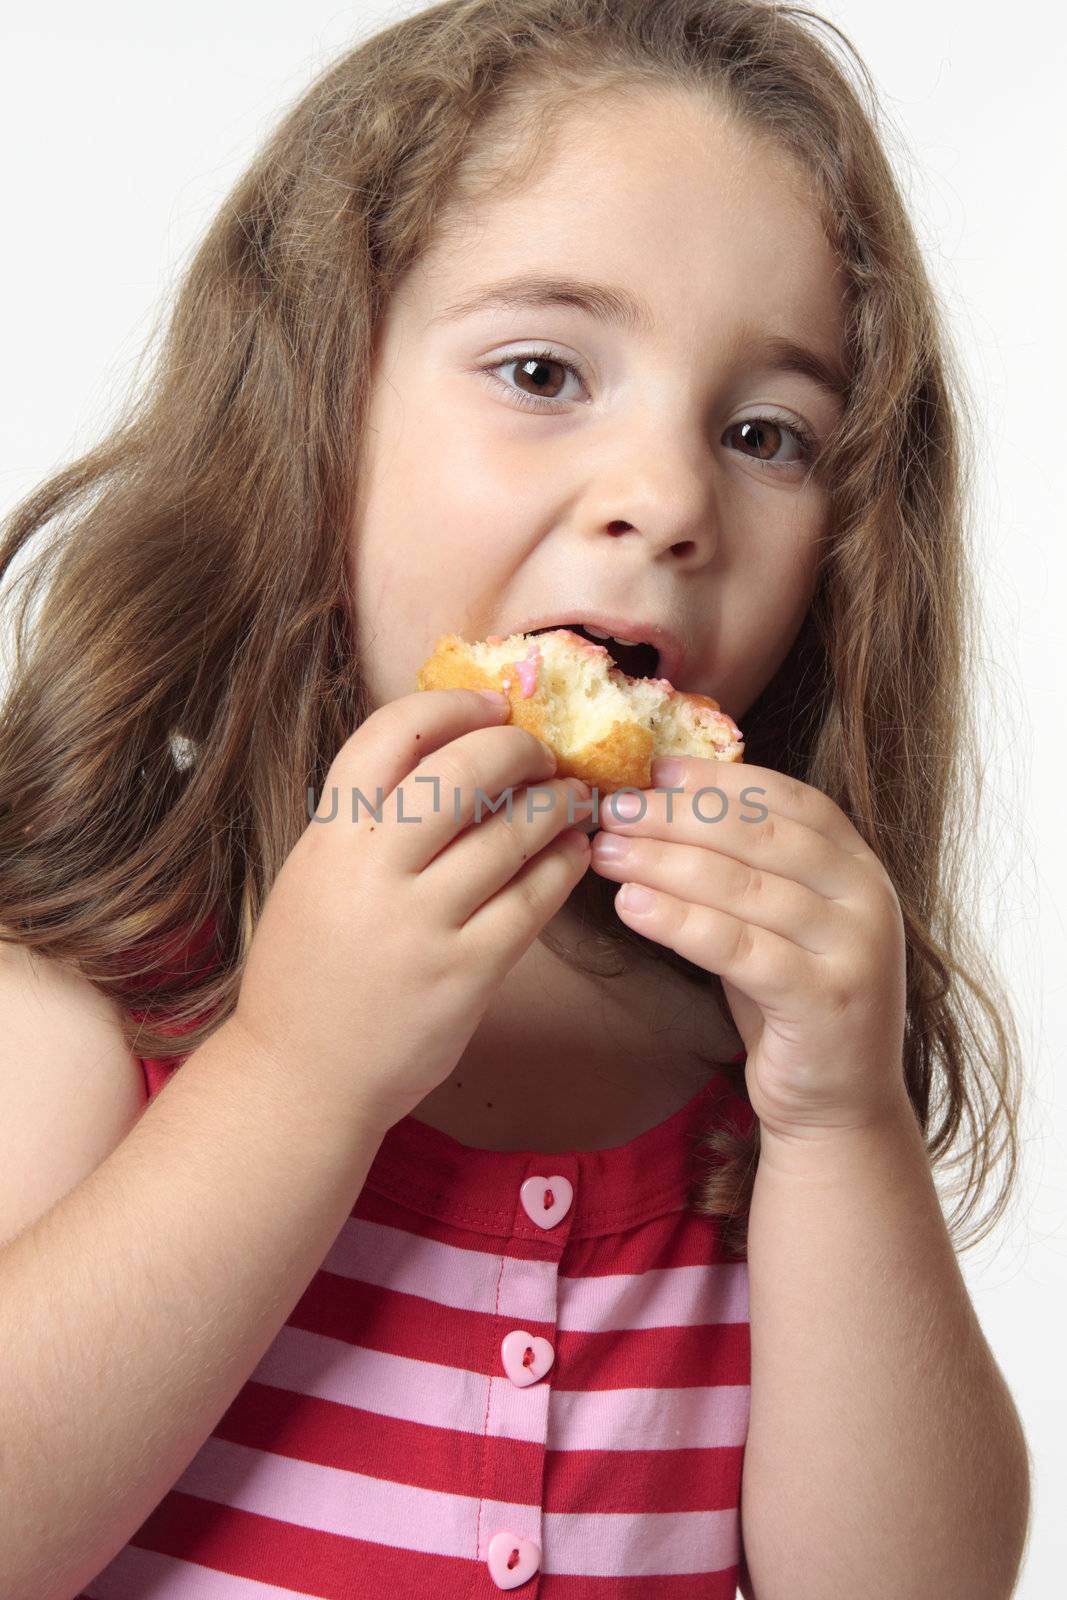 Child eating junk food donut. by lovleah